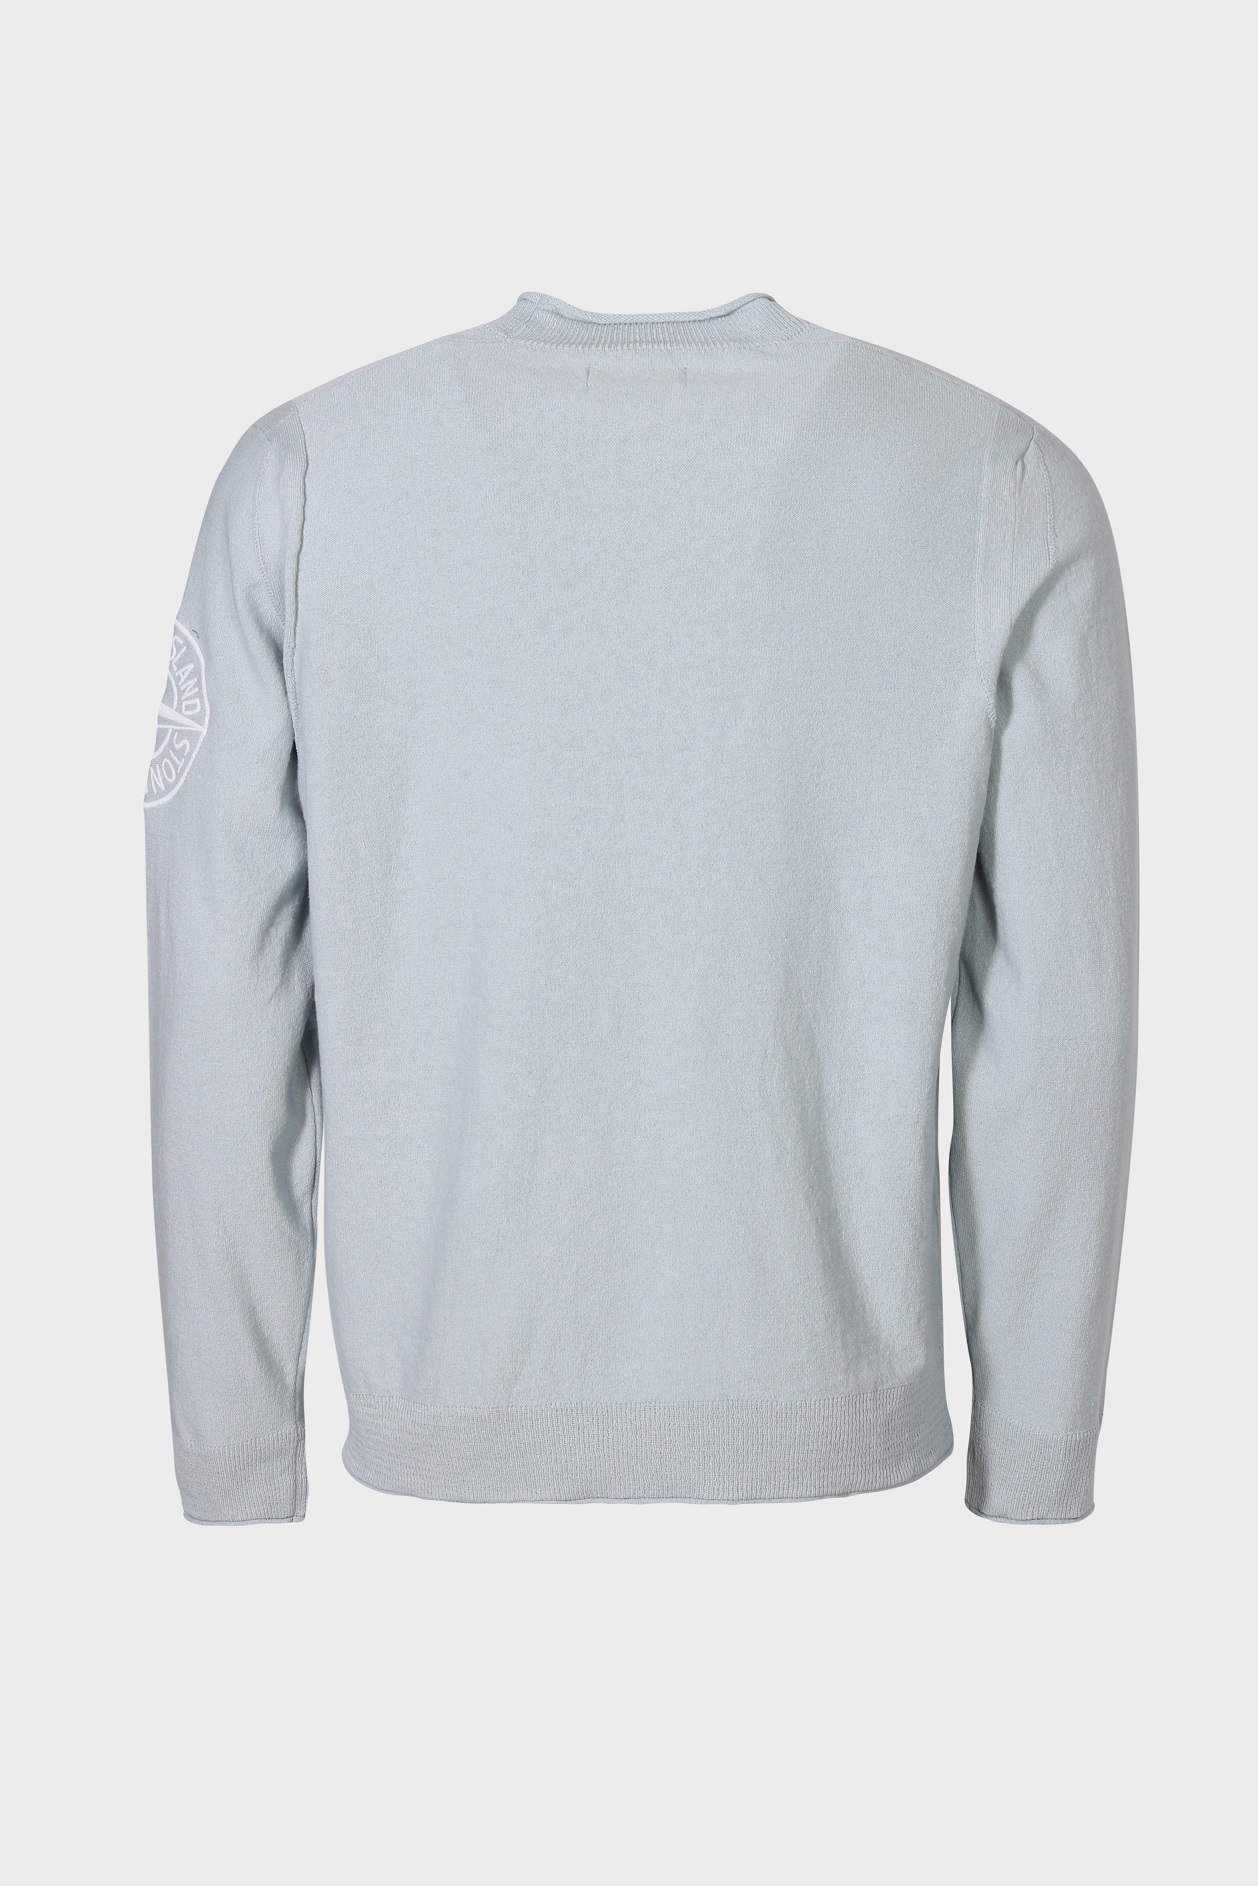 STONE ISLAND Cotton Knit Pullover in Sky Blue 3XL